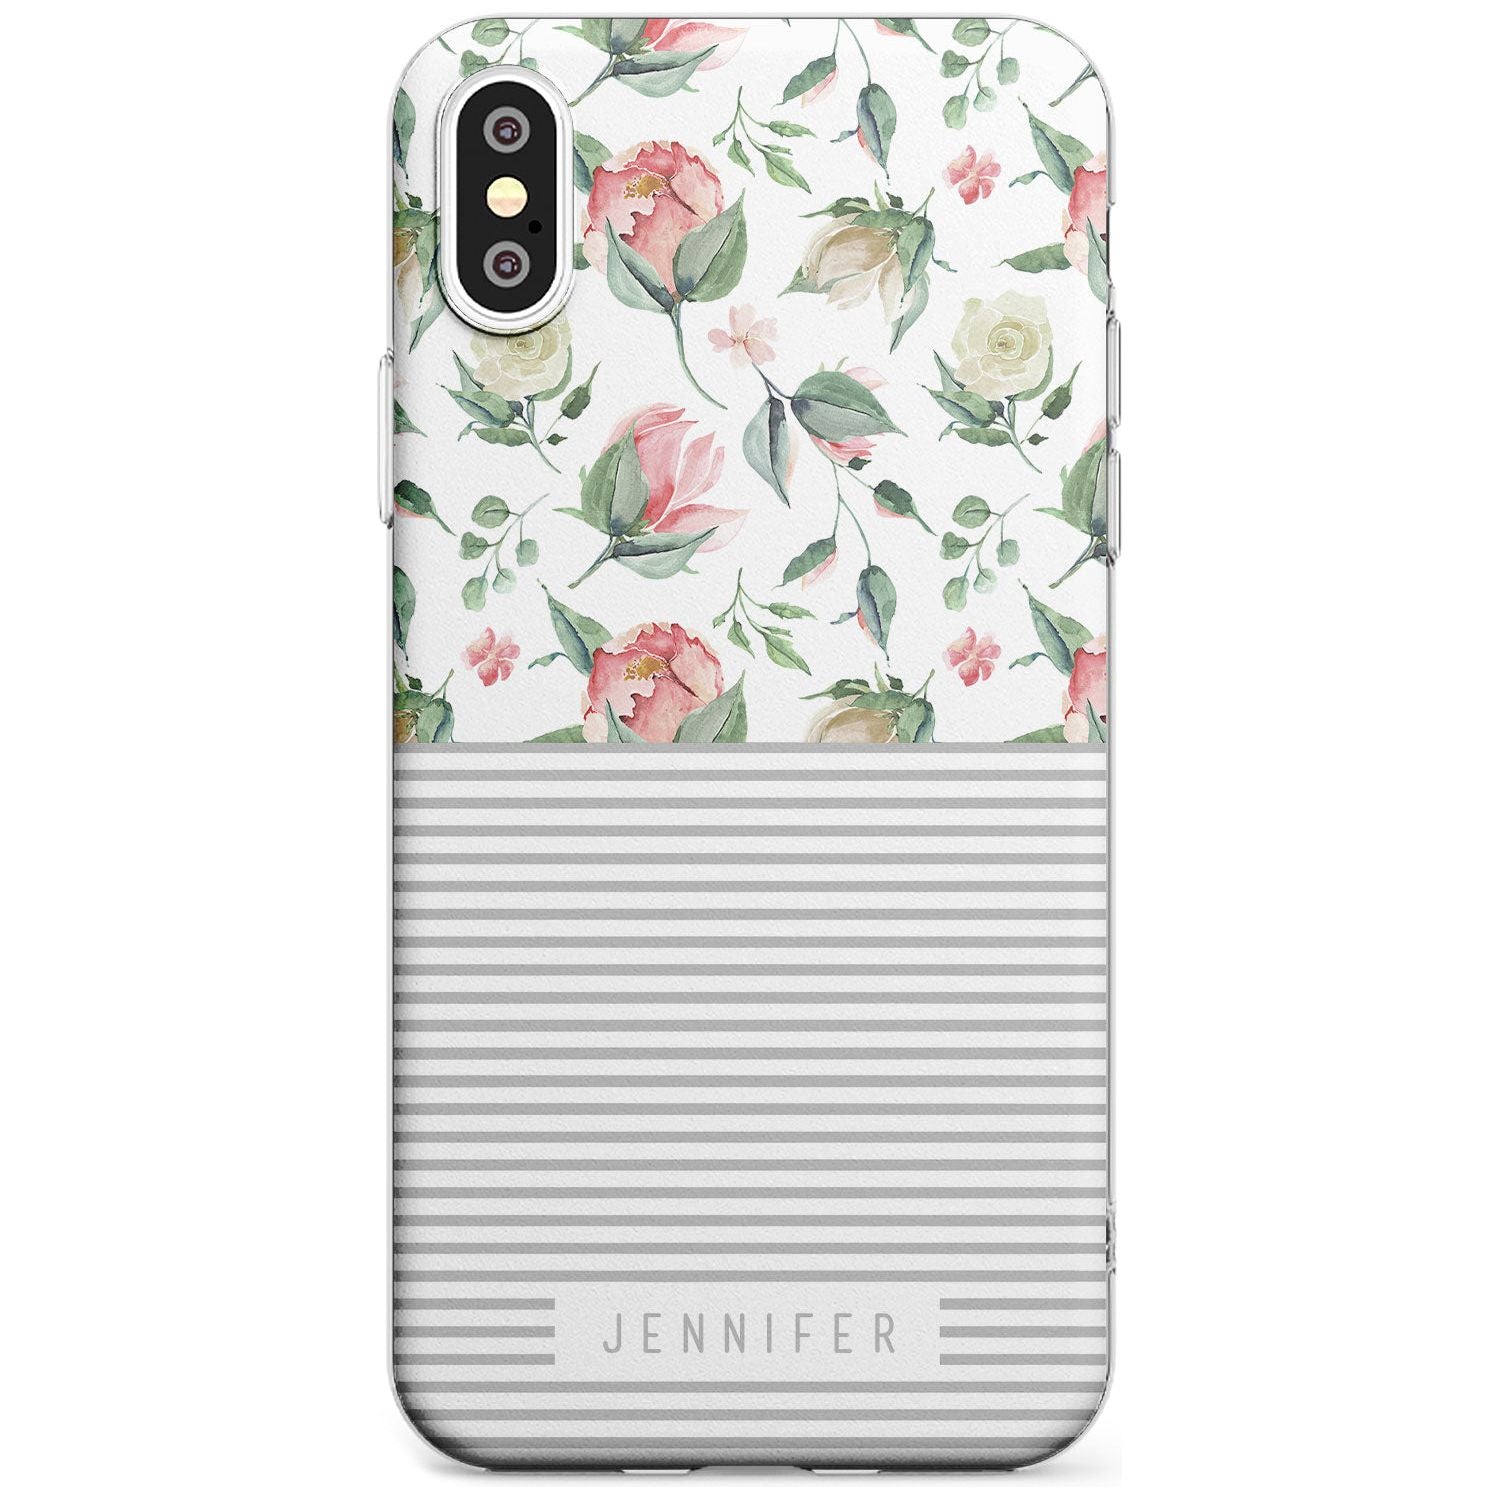 Light Floral Pattern & Stripes Black Impact Phone Case for iPhone X XS Max XR